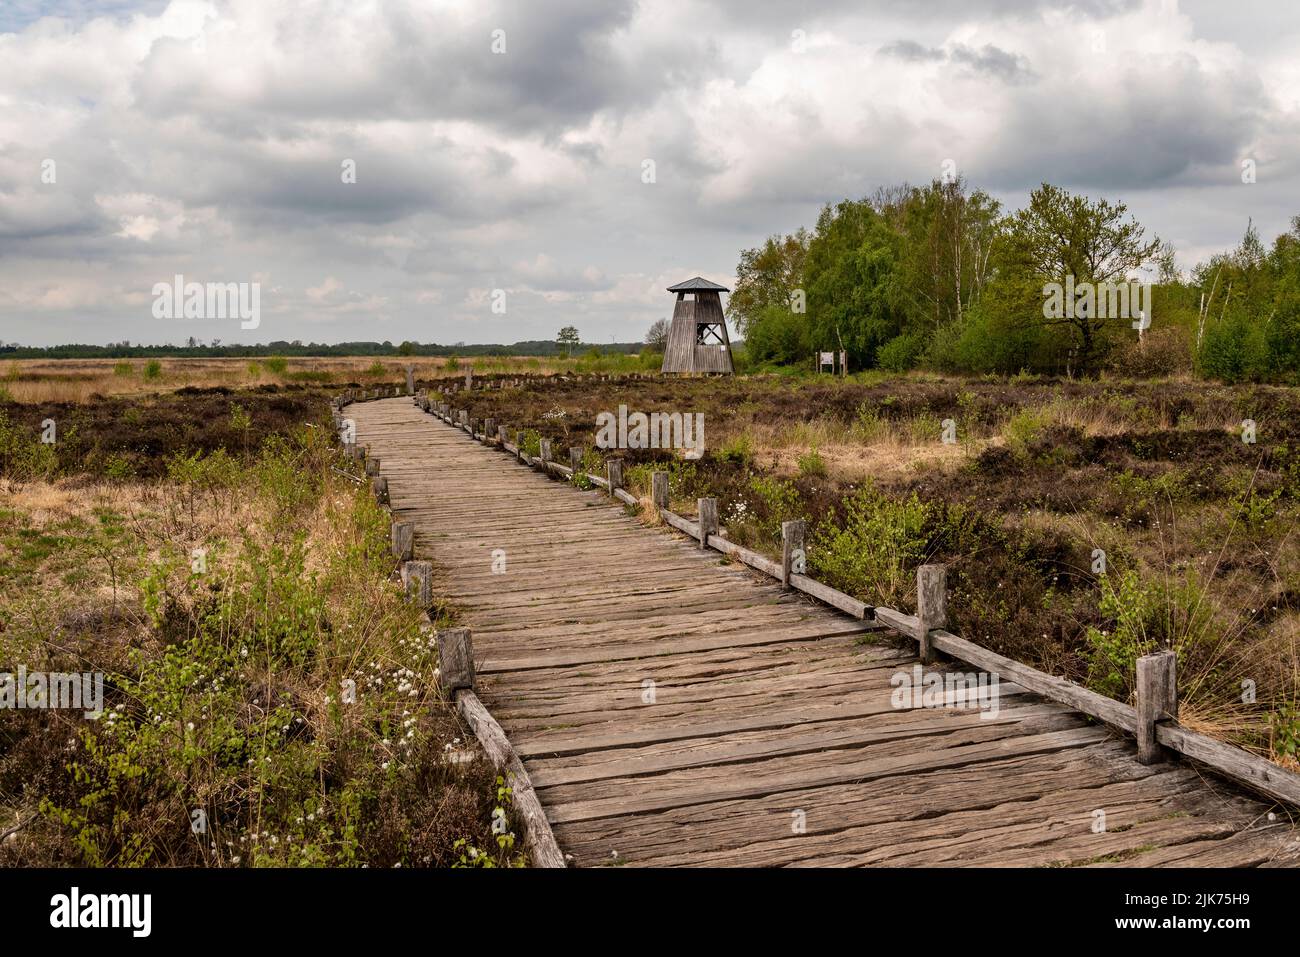 Beautiful moor landscape with a wooden boardwalk and a wooden lookout tower in the 'Großes Torfmoor' raised bog, Hille, Germany Stock Photo